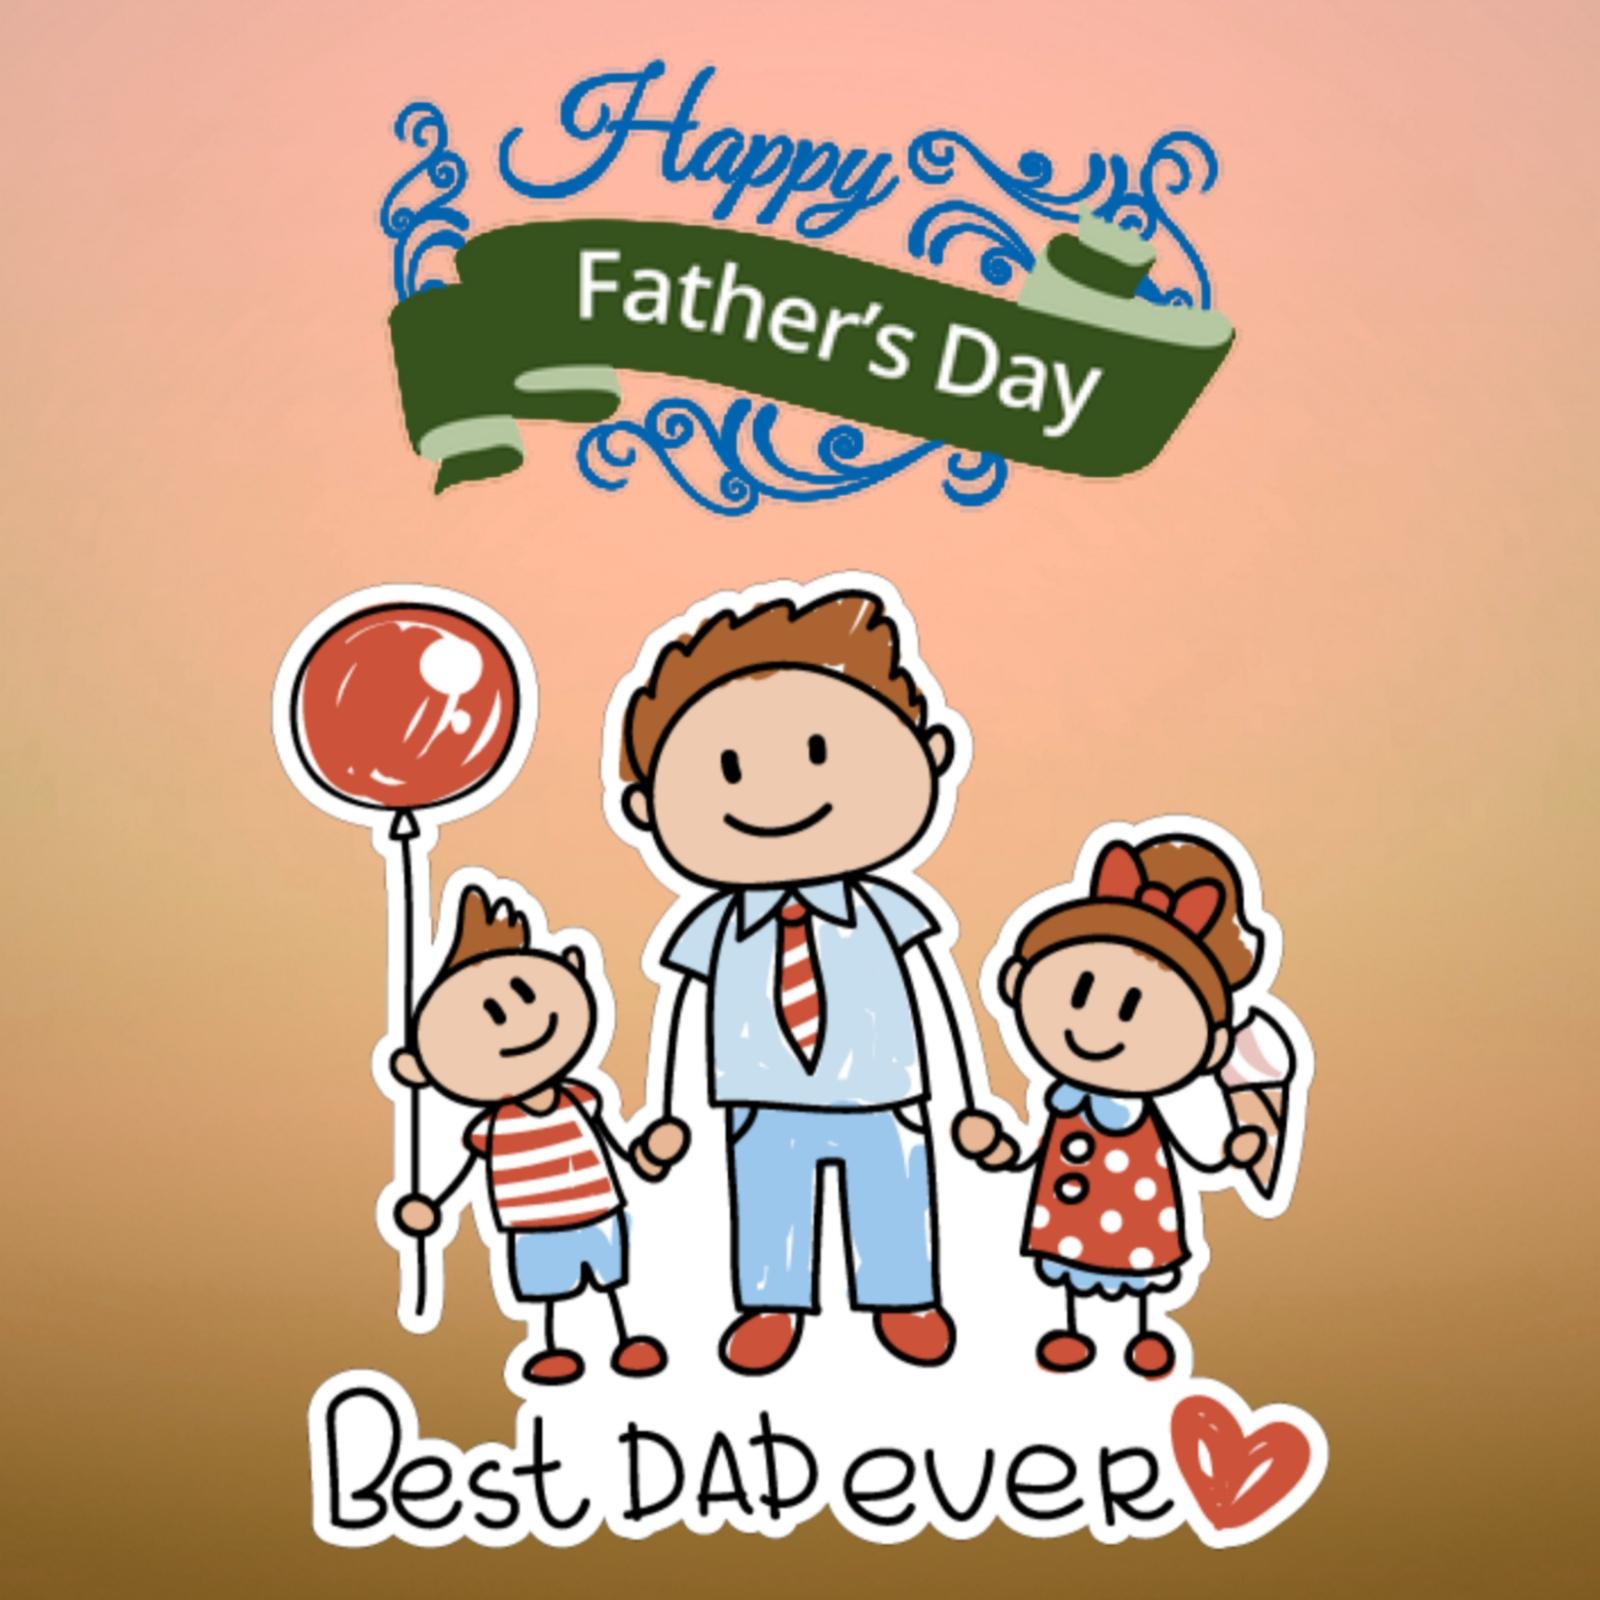 Happy Father's Day Best Dad Ever Image